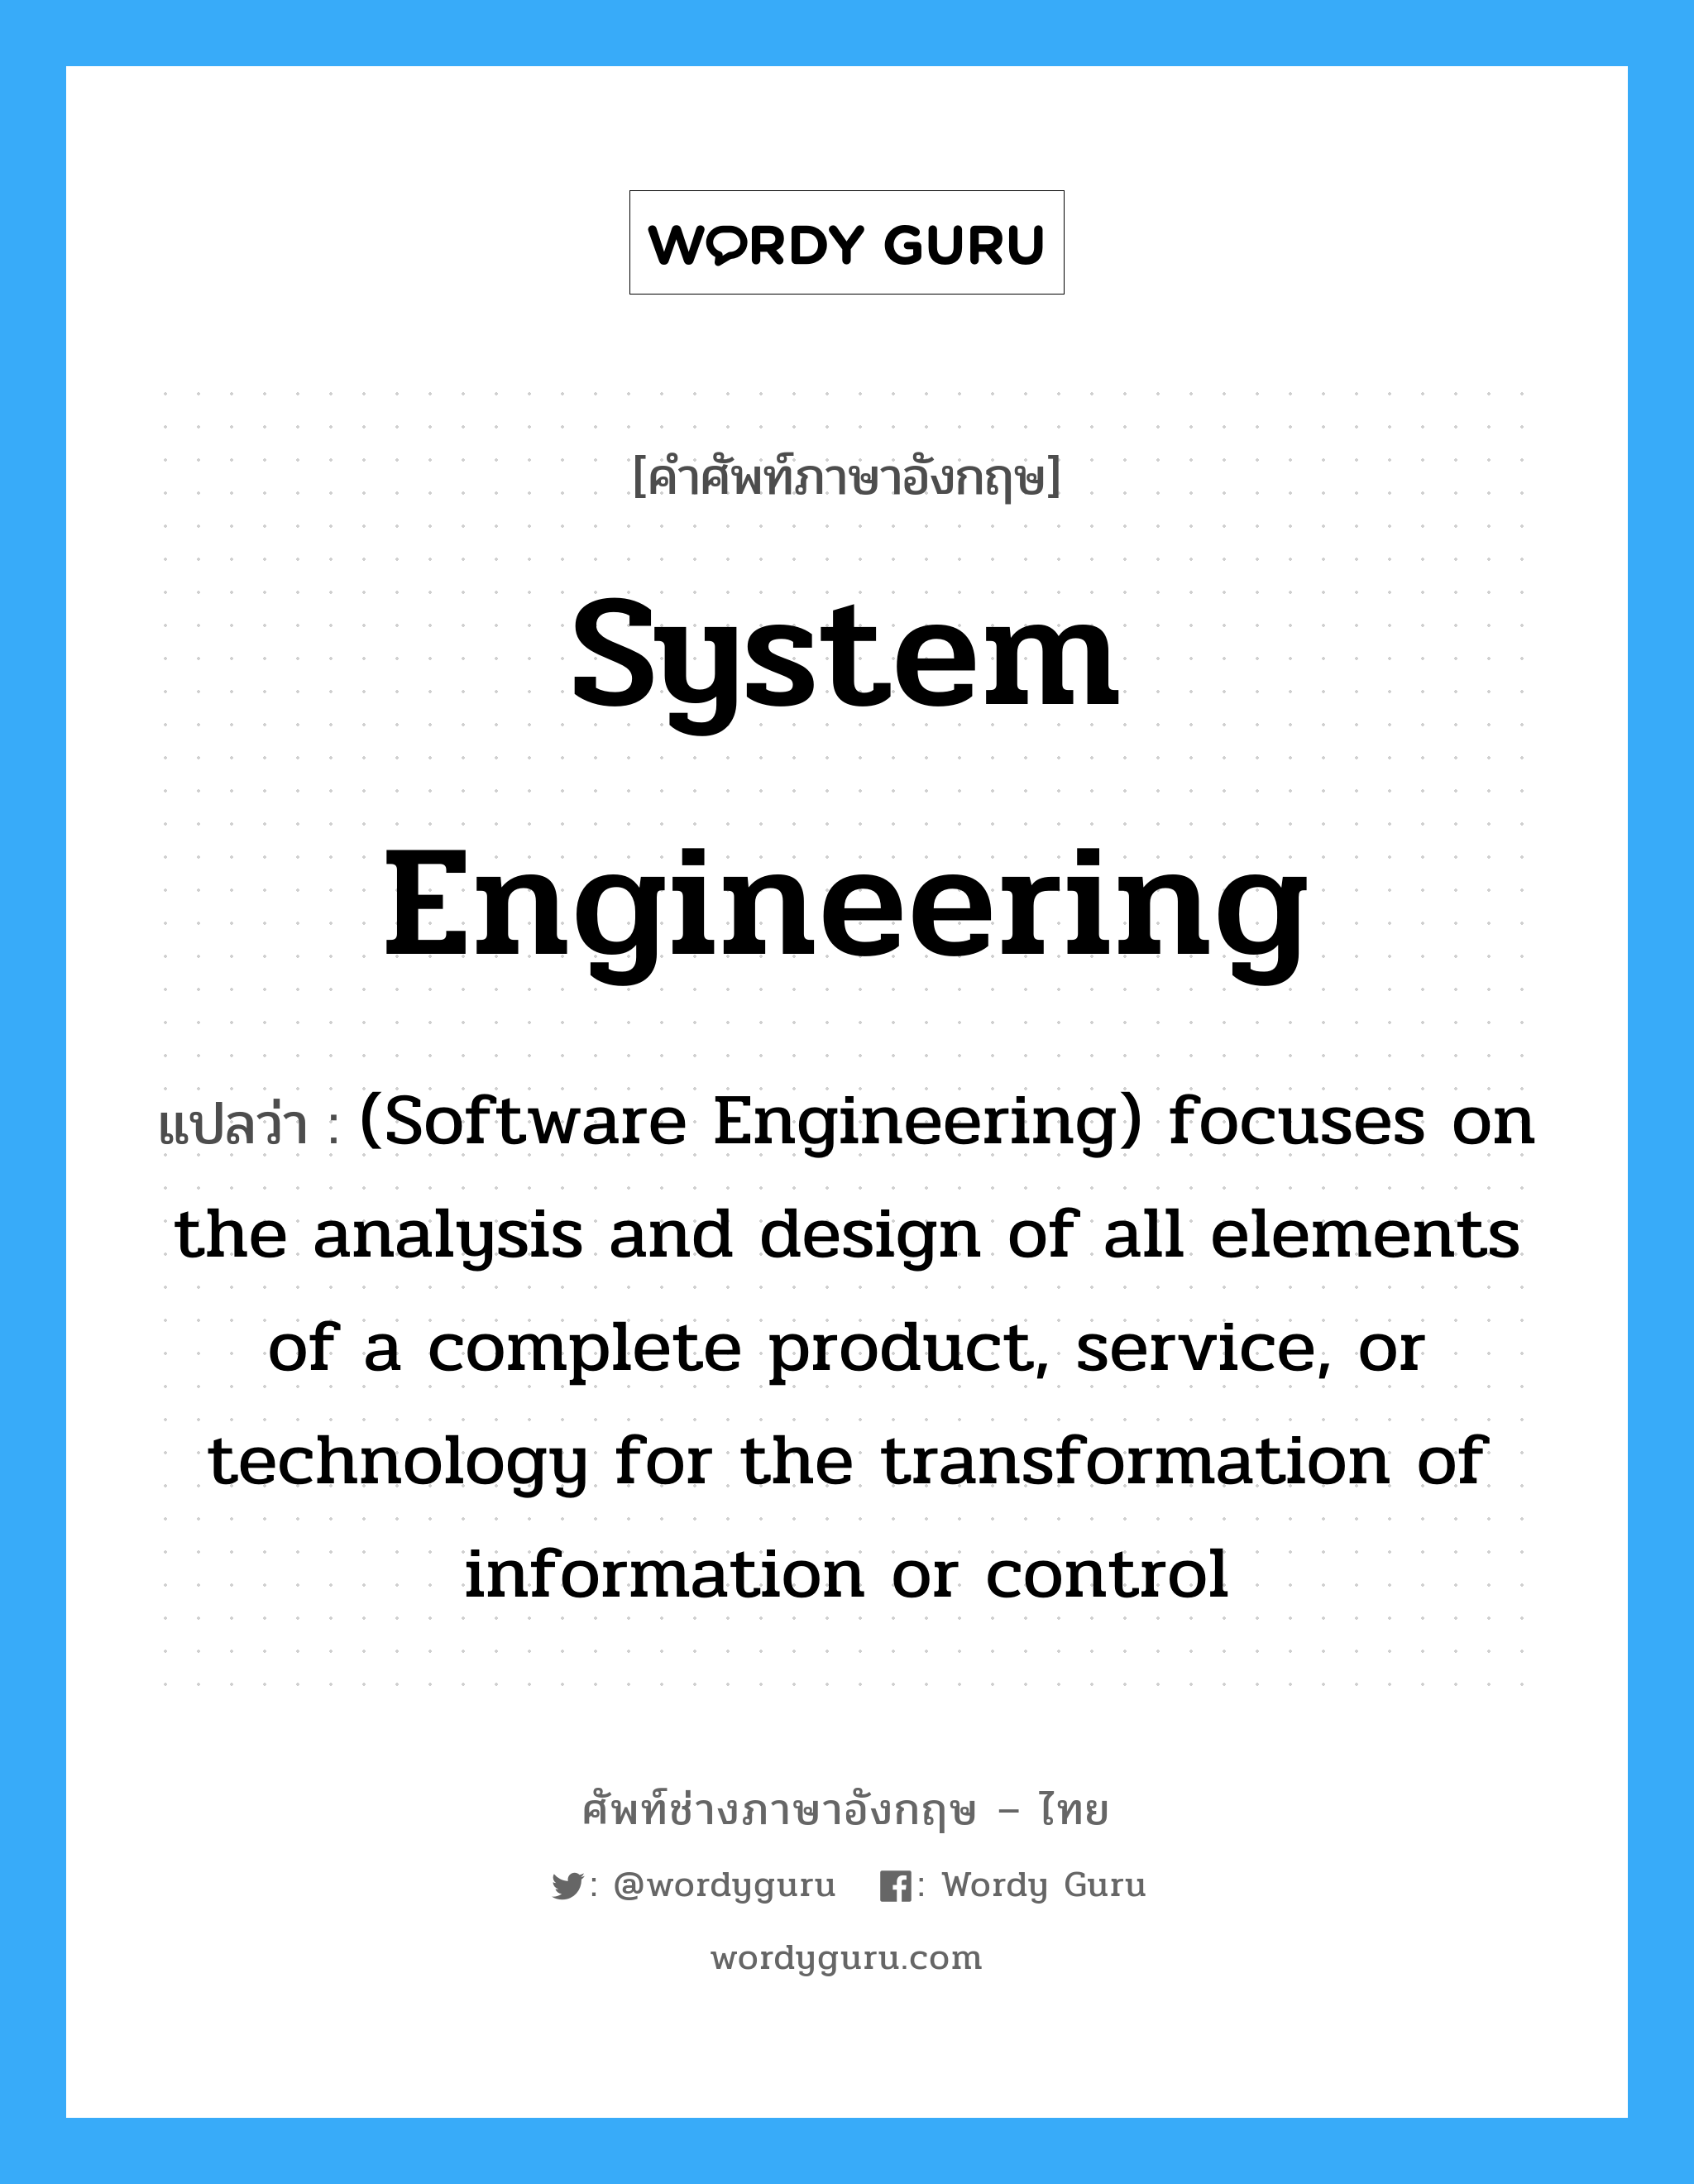 System engineering แปลว่า?, คำศัพท์ช่างภาษาอังกฤษ - ไทย System engineering คำศัพท์ภาษาอังกฤษ System engineering แปลว่า (Software Engineering) focuses on the analysis and design of all elements of a complete product, service, or technology for the transformation of information or control